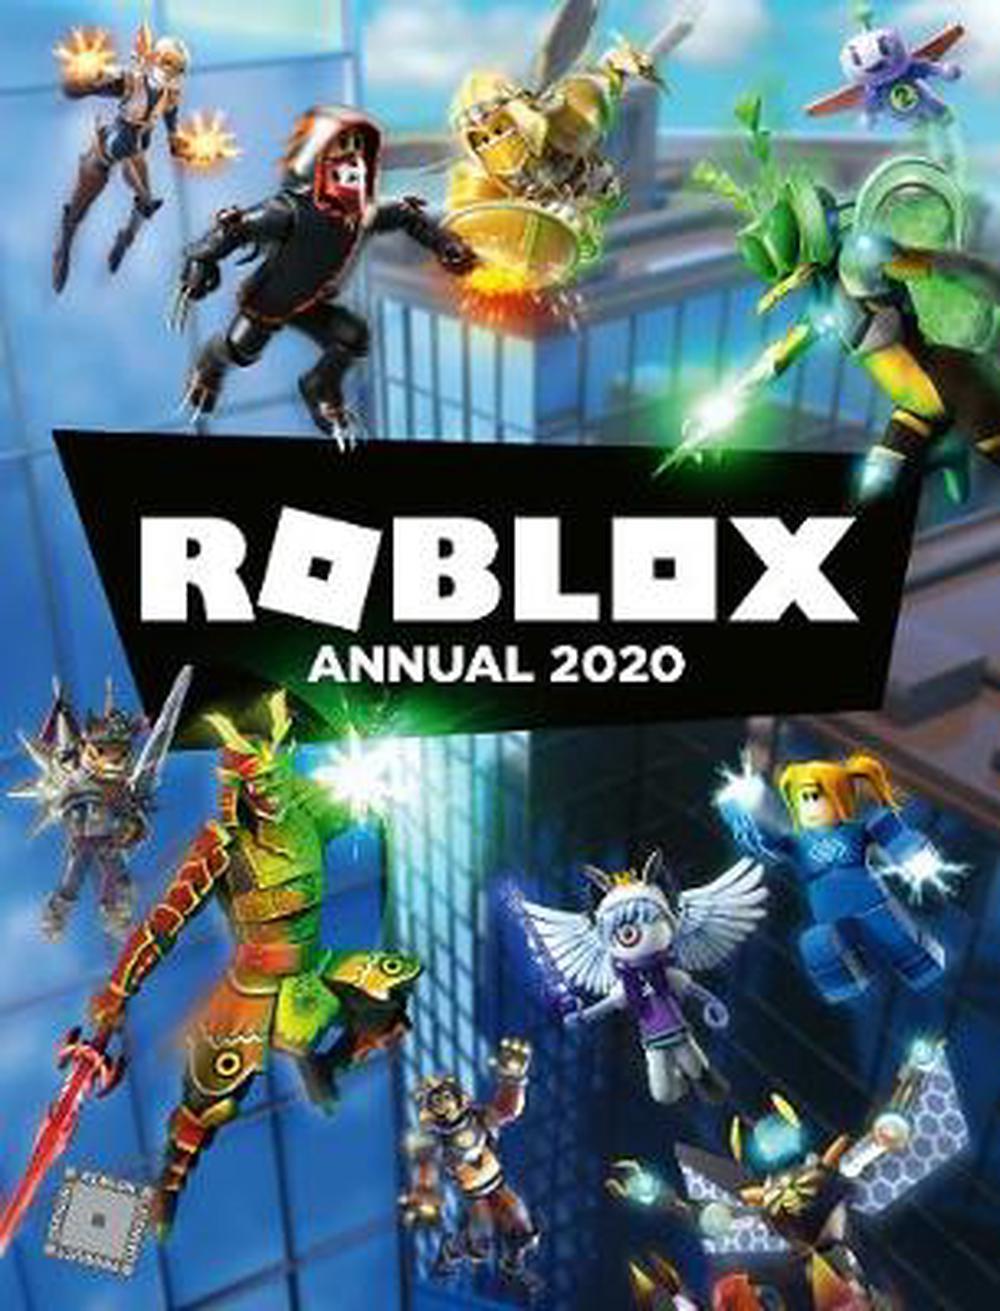 Roblox Annual 2020 - life of a roblox noobbook eight free books childrens